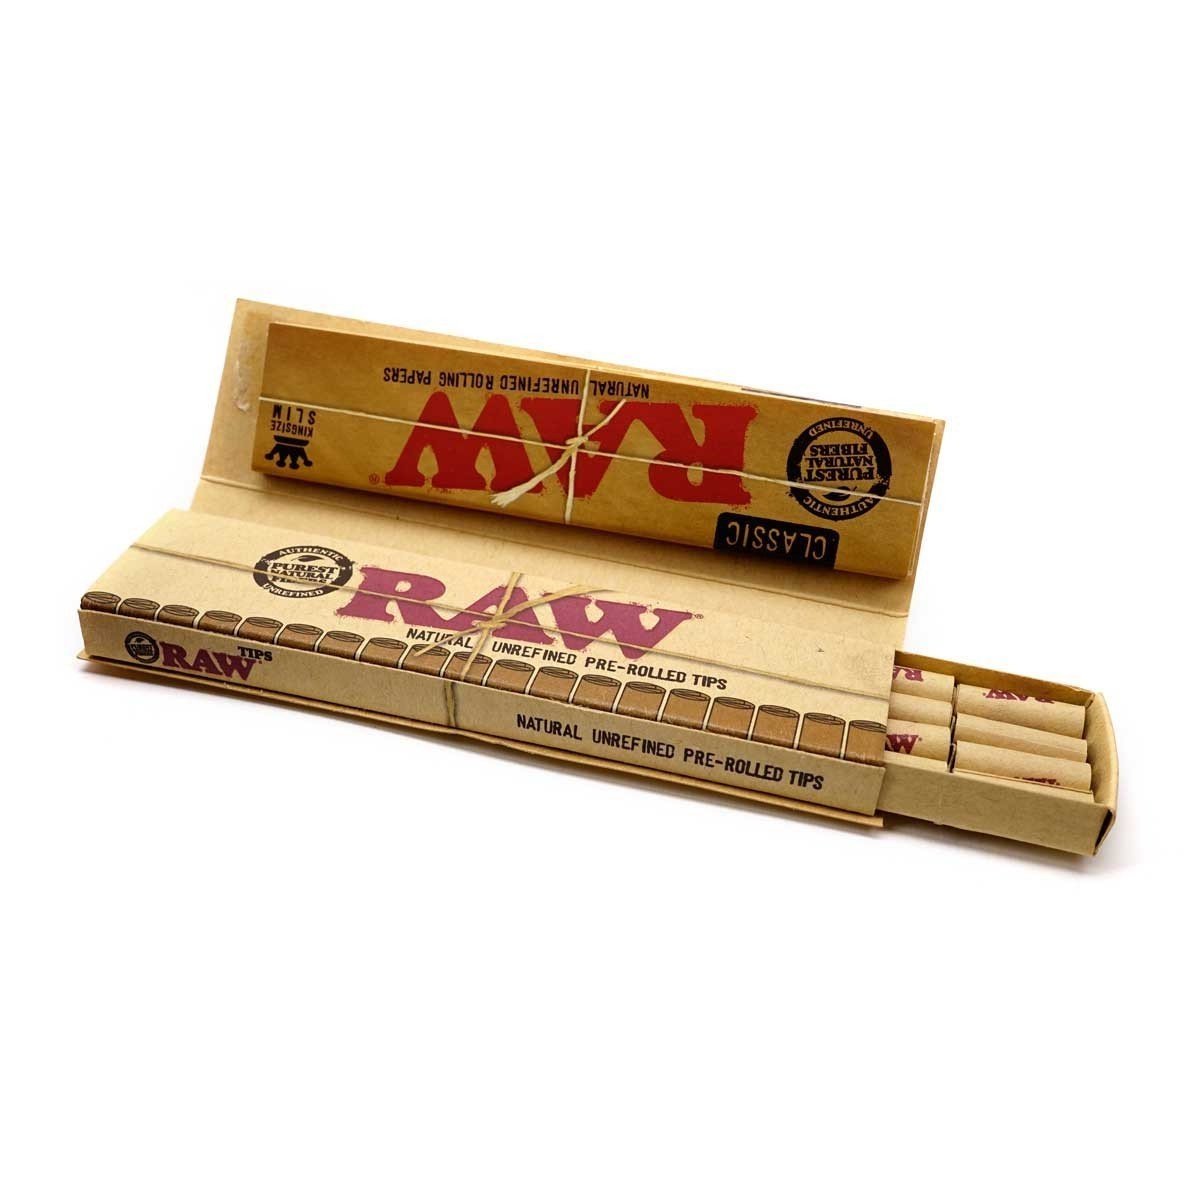 Raw Connoisseur Kingsize Slim Papers & Tips